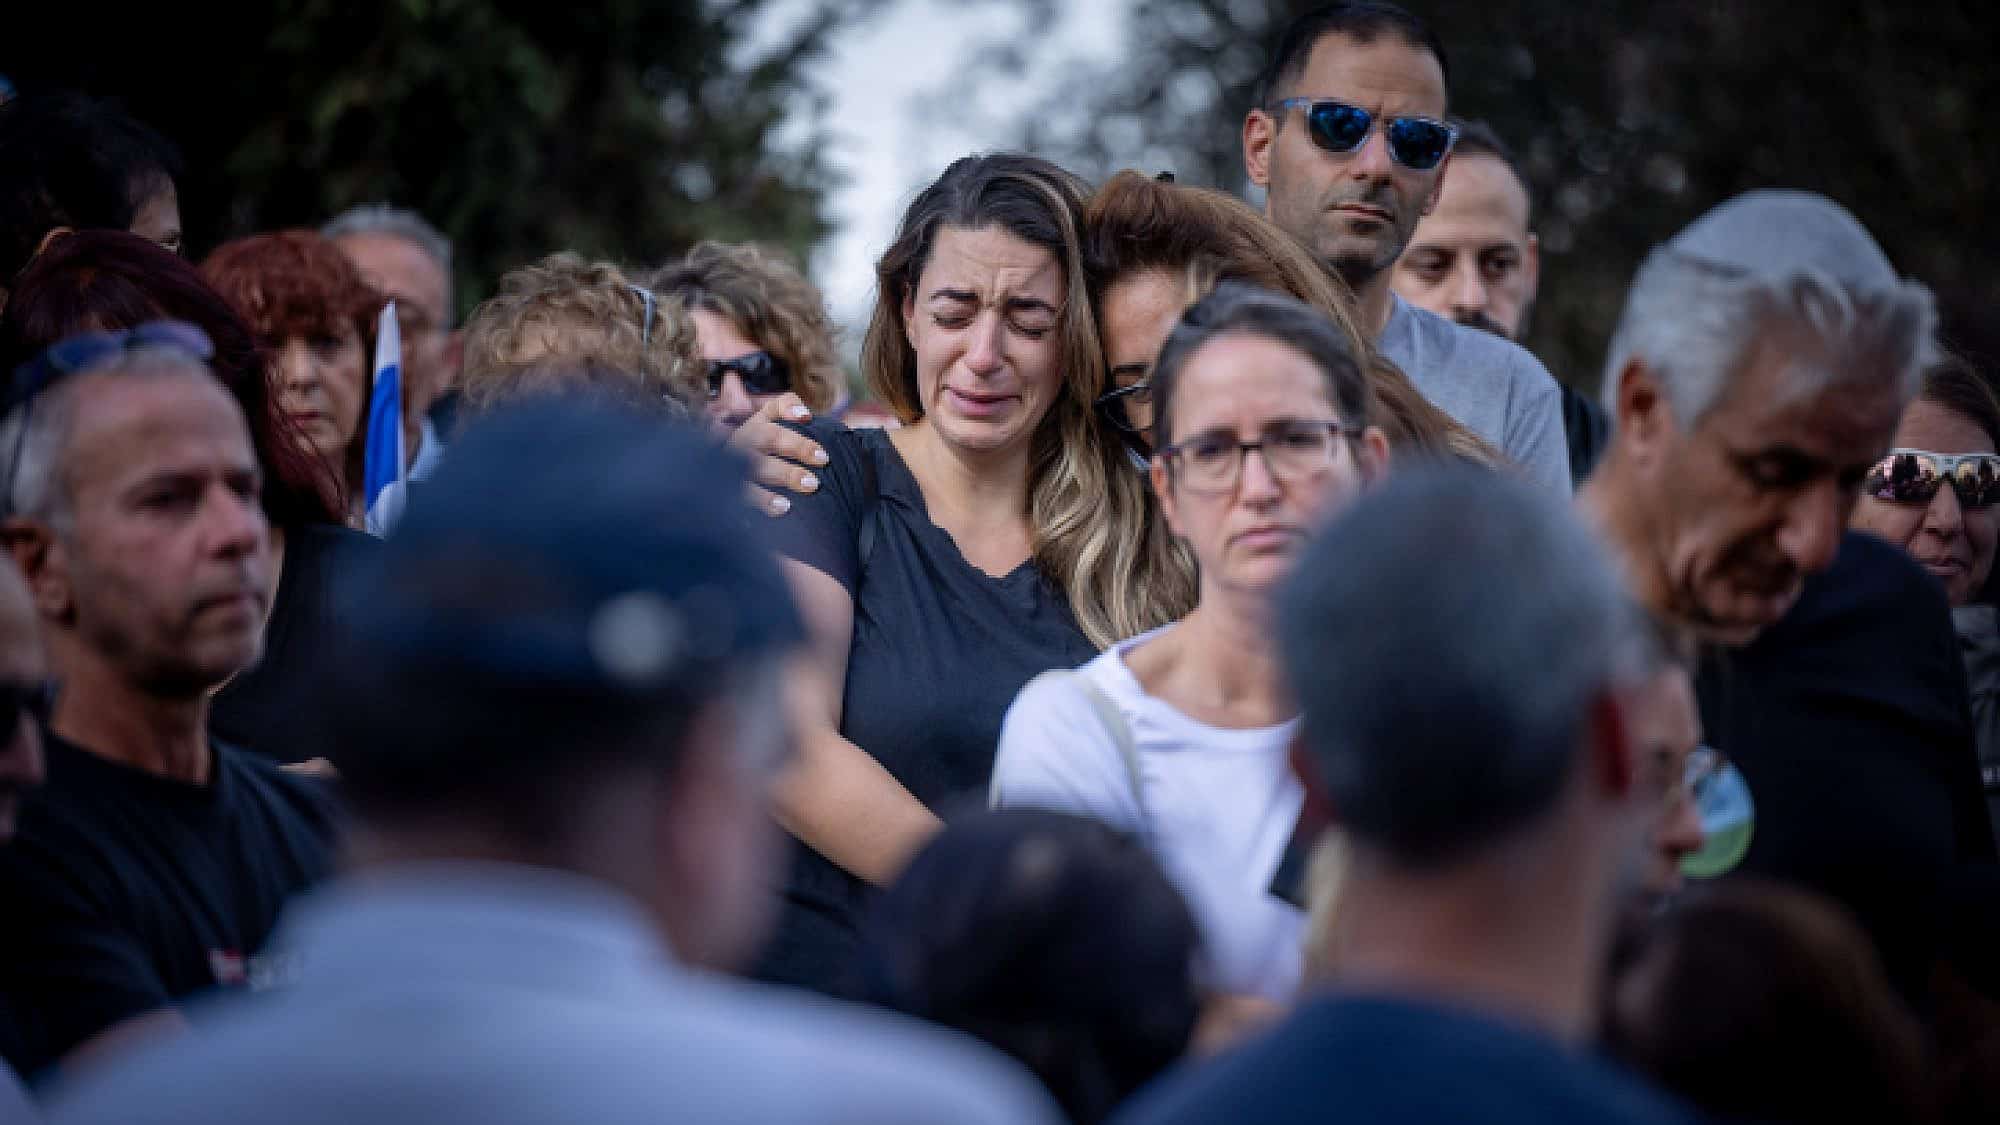 Mourners attend the funeral at Kibbutz Beit Guvrin on Tuesday of Yosef Vahab, whom Hamas terrorists murdered in Kibbutz Nir Oz on Oct. 7. Photo by Yonatan Sindel/Flash90.